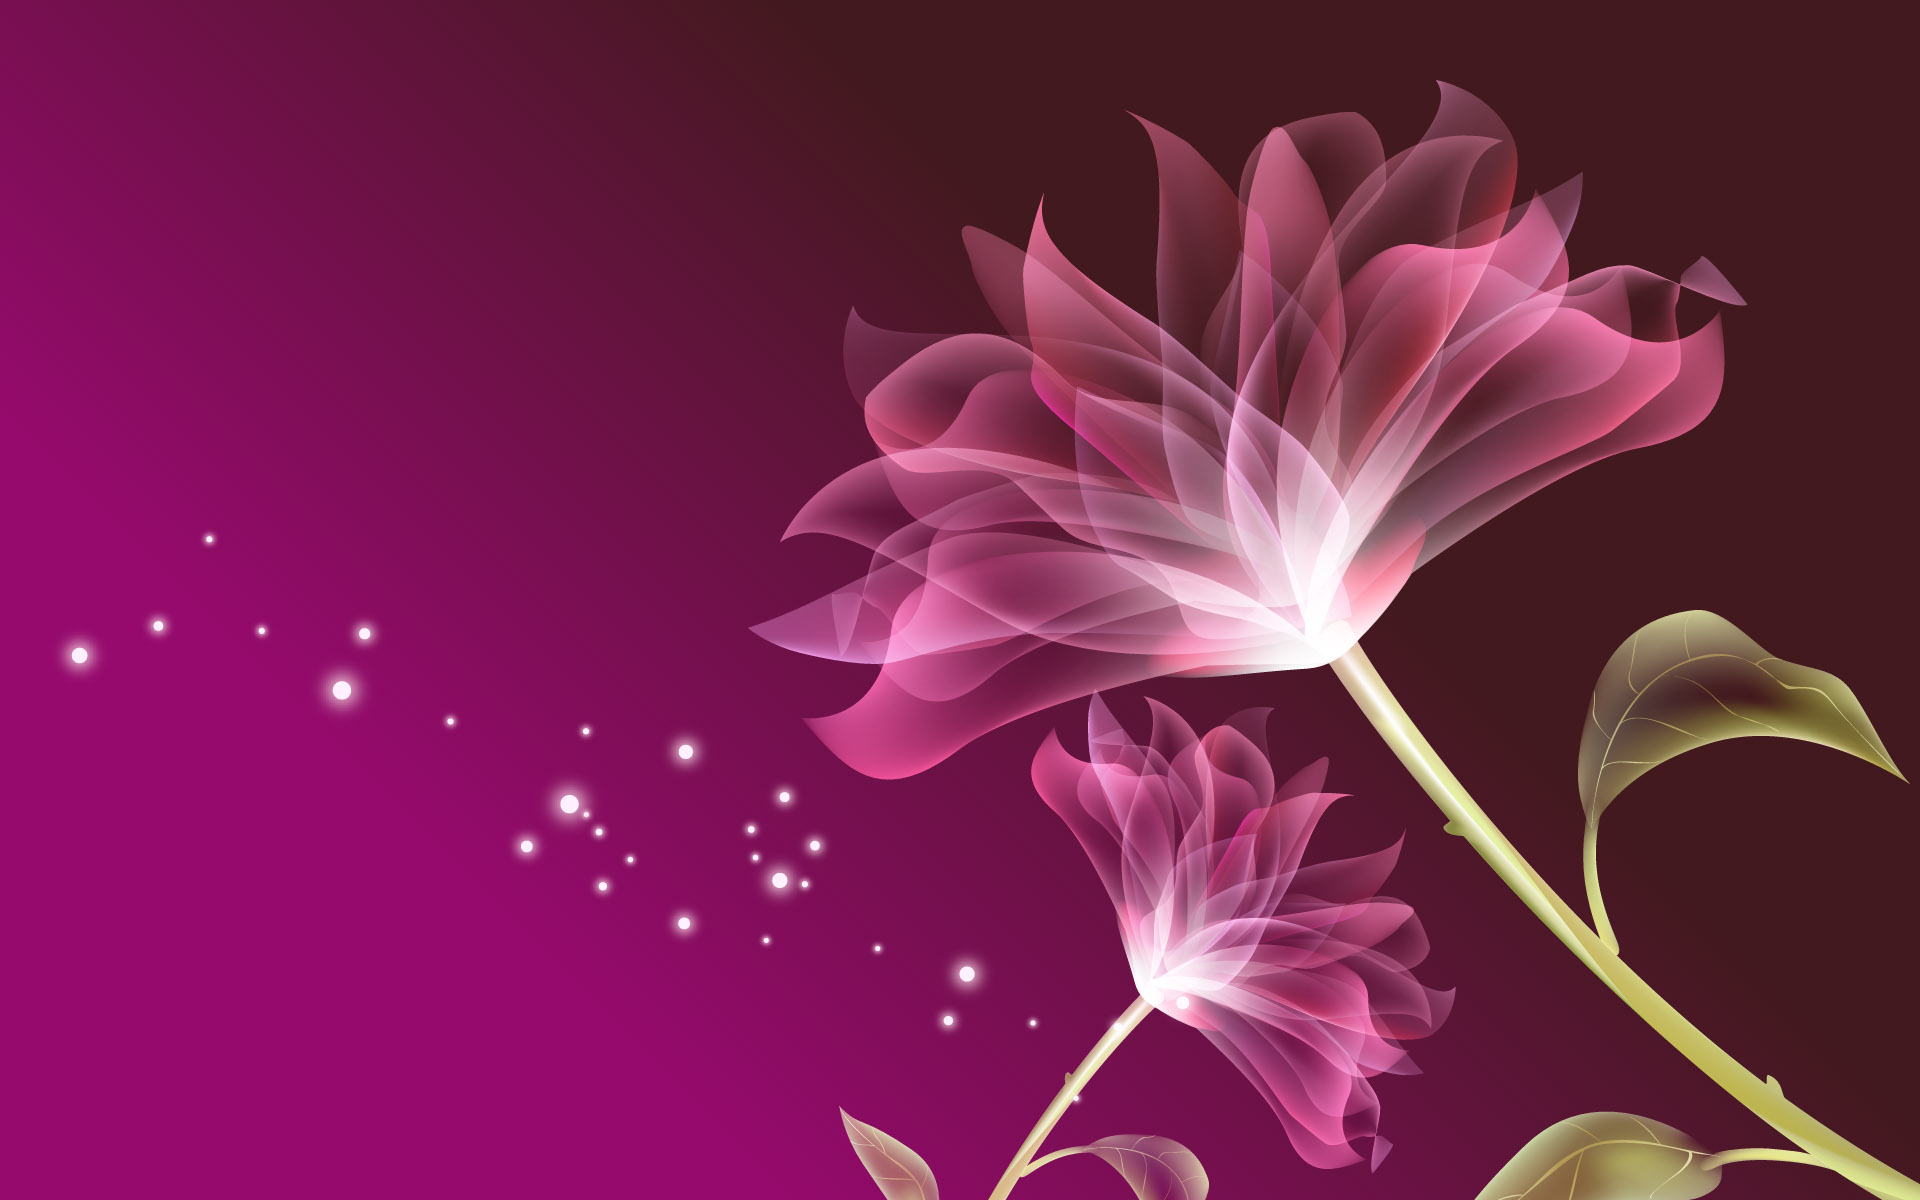 Flowers Wallpapers For Laptop - Abstract Images Of Flowers - HD Wallpaper 